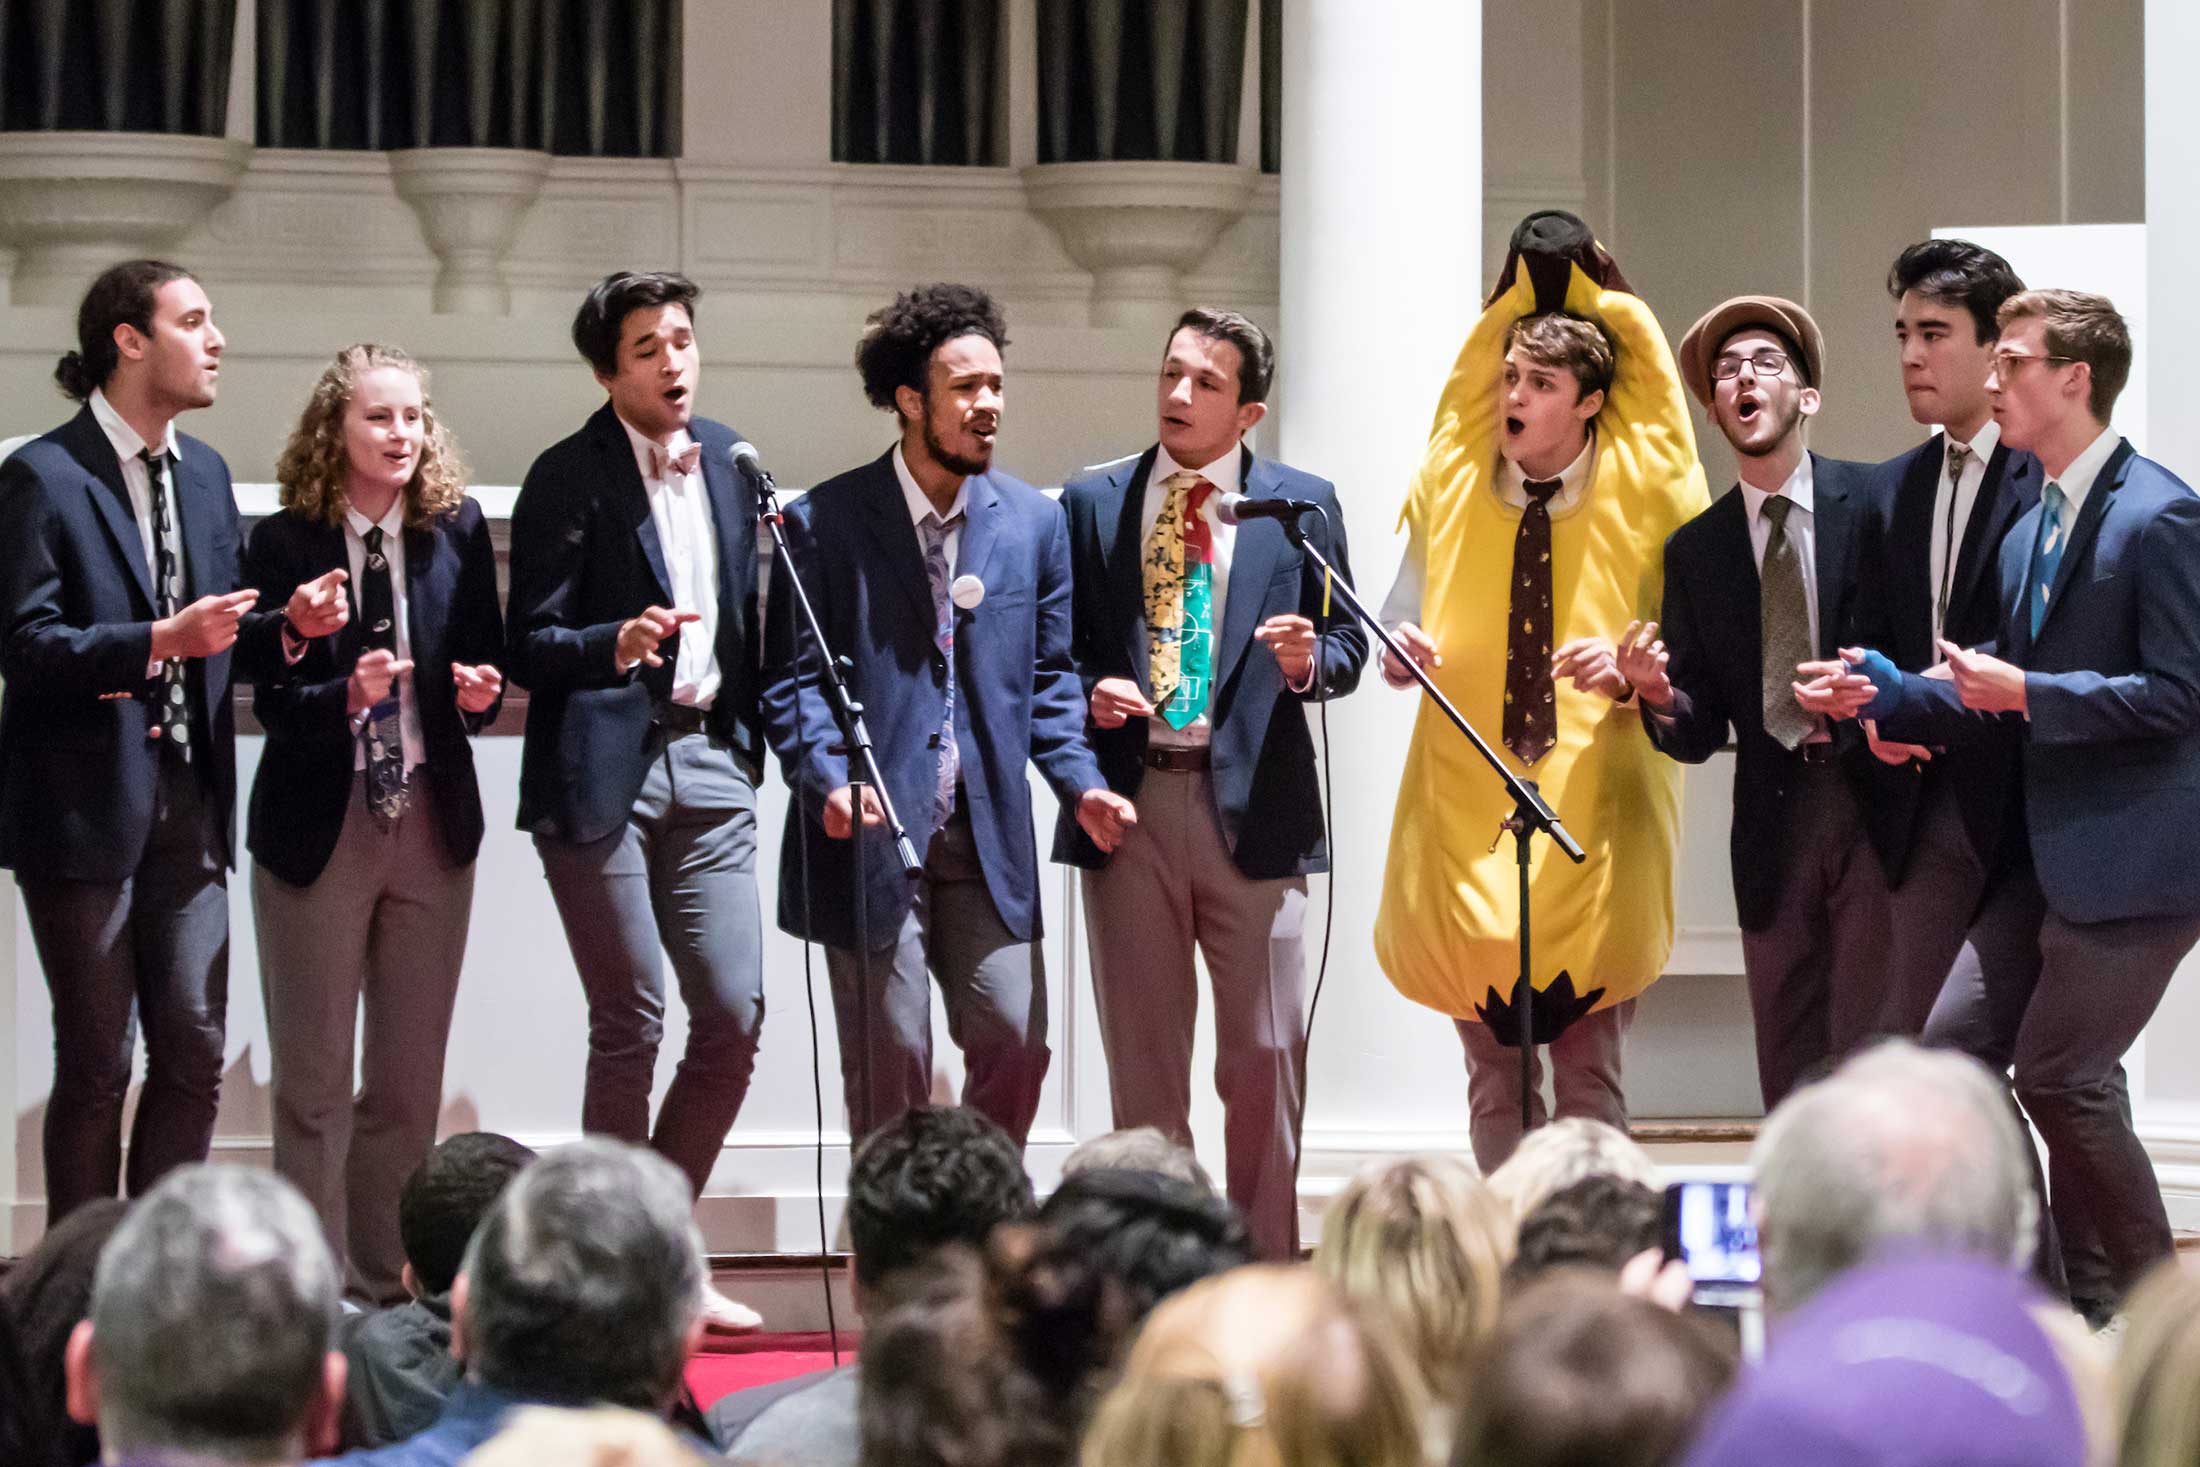 An a capella group performs (one member is dressed like a banana)